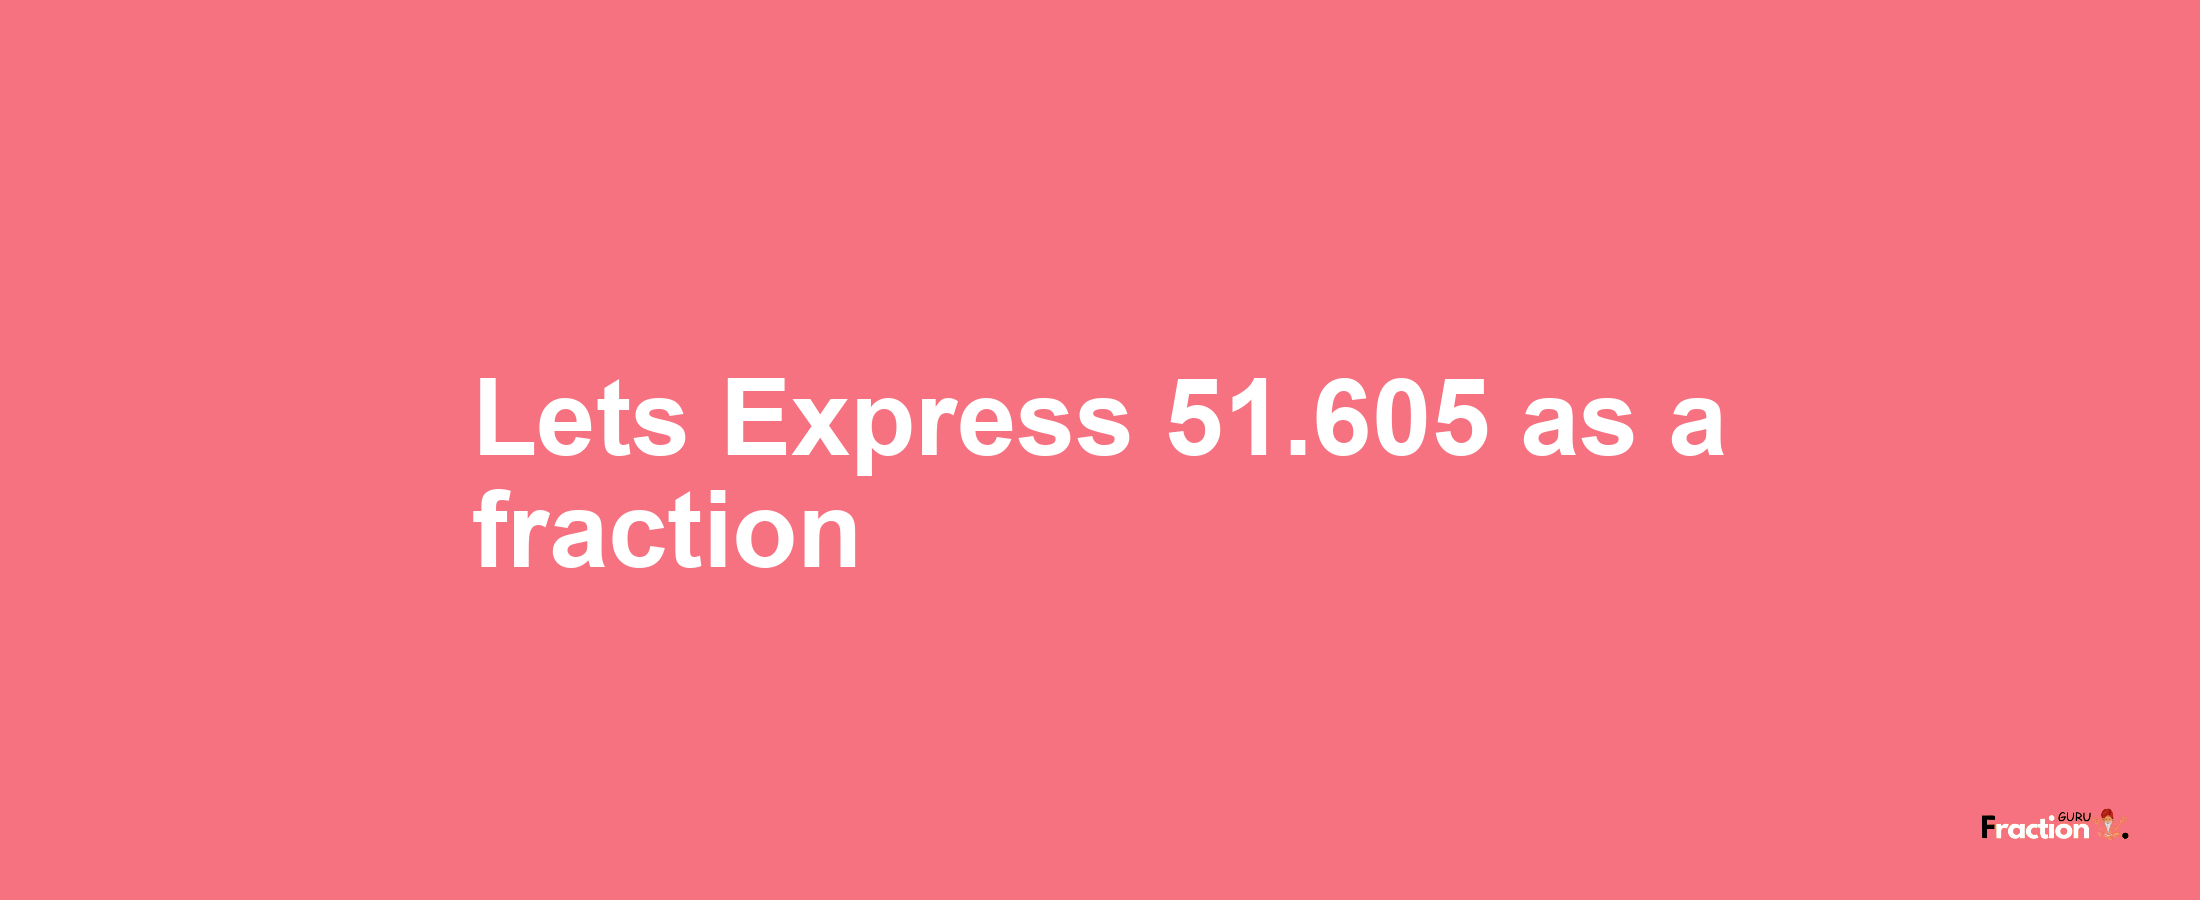 Lets Express 51.605 as afraction